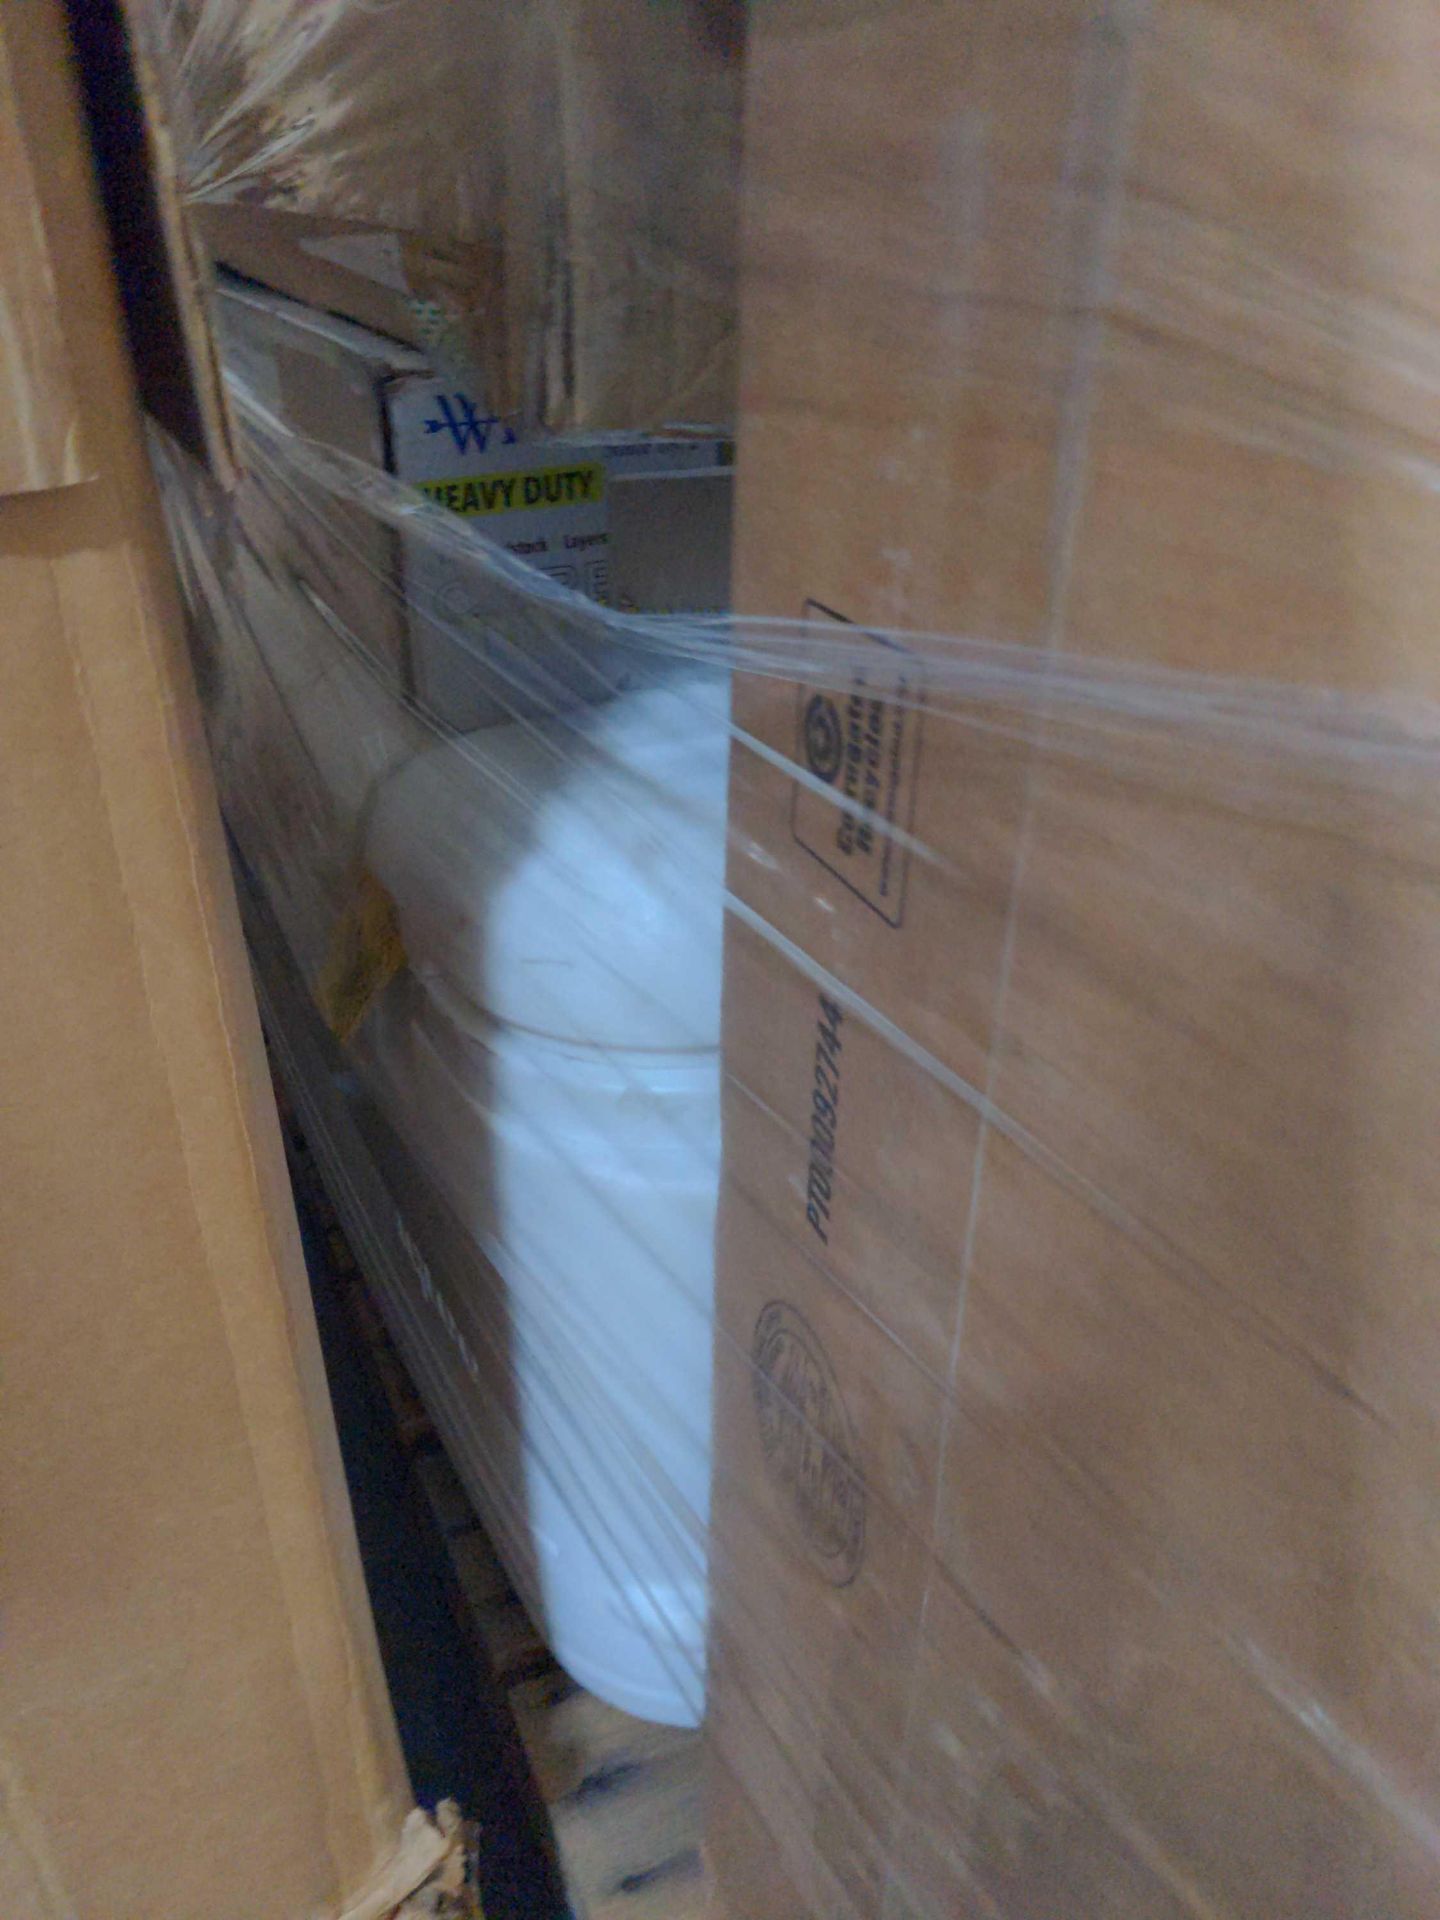 Pallet of AirCare evaporative devices, King Innovation 86080, Cooler, Shuanghu, and other furniture - Image 4 of 4